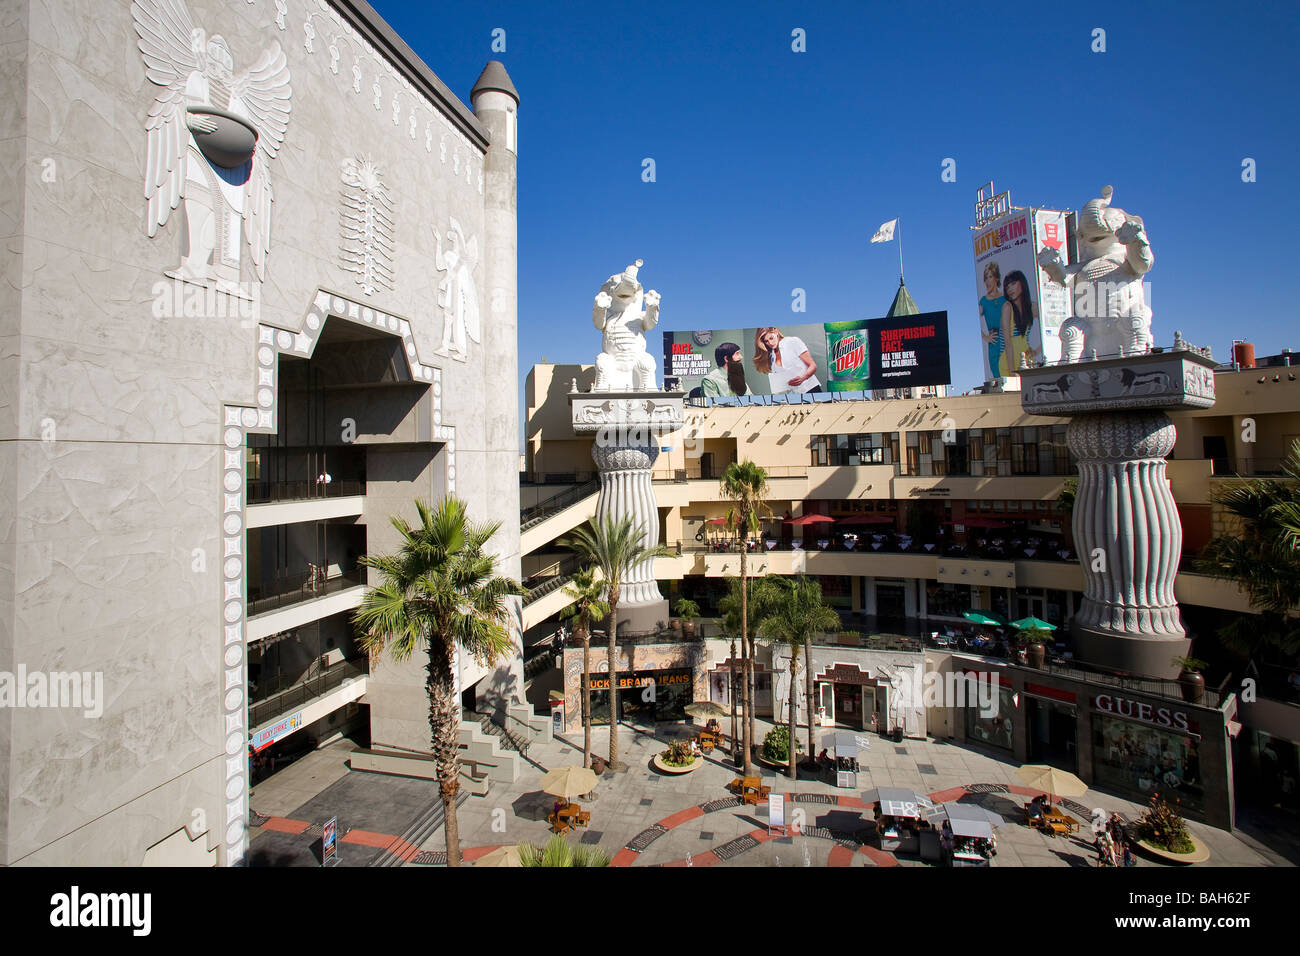 United States, California, Los Angeles, Hollywood, shopping center ...